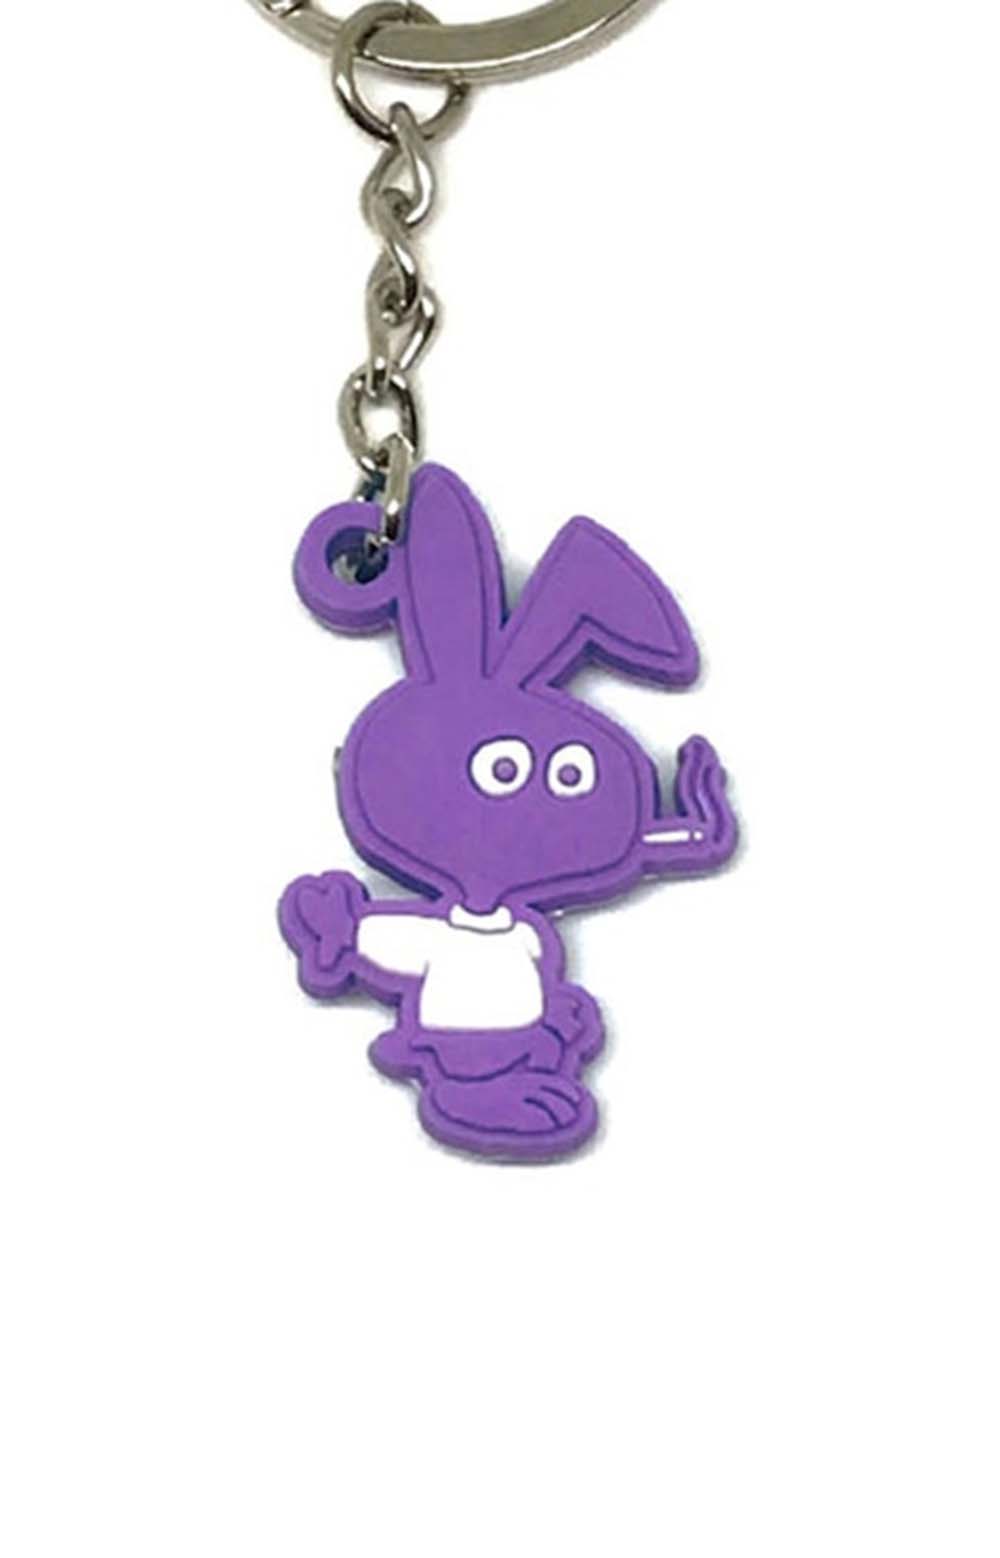 Cold Bunny Rubber Keychain - Purple